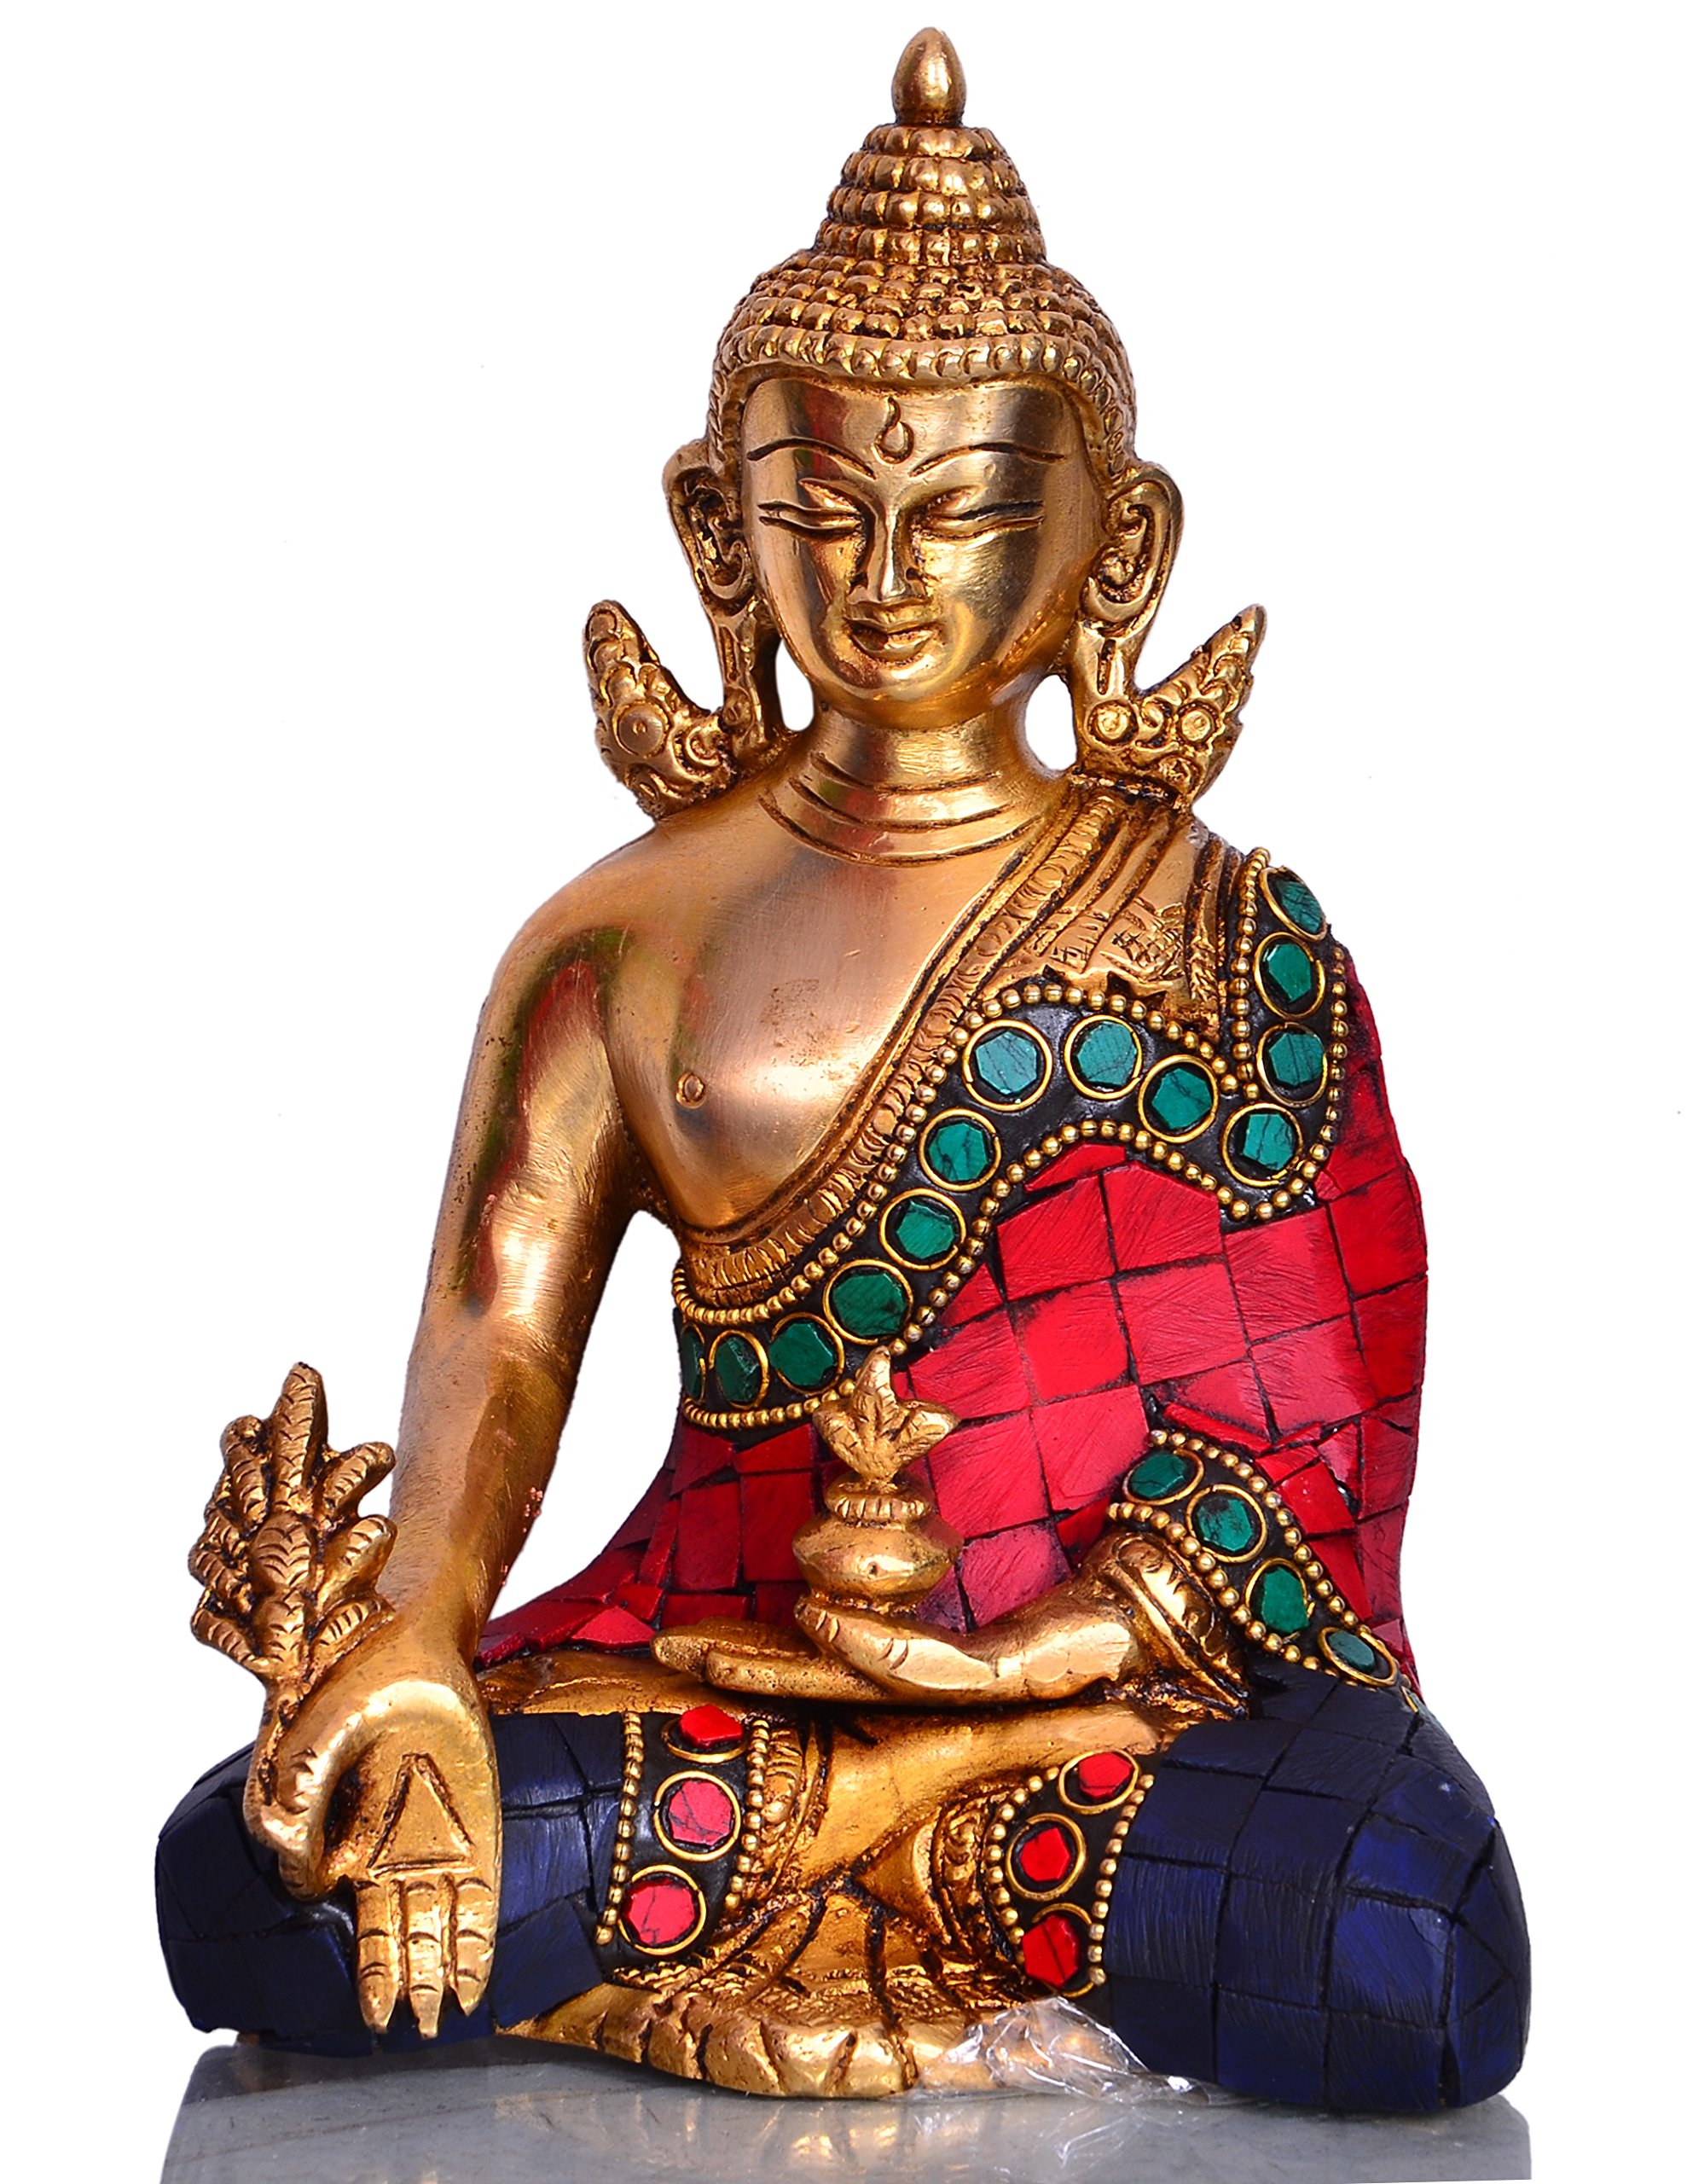 Purpledip Healing Medicine Lord Buddha in Solid Brass Metal with Turquoise Gem-Stone Work for Home Temple, Office Table or Shop Counter (10531)